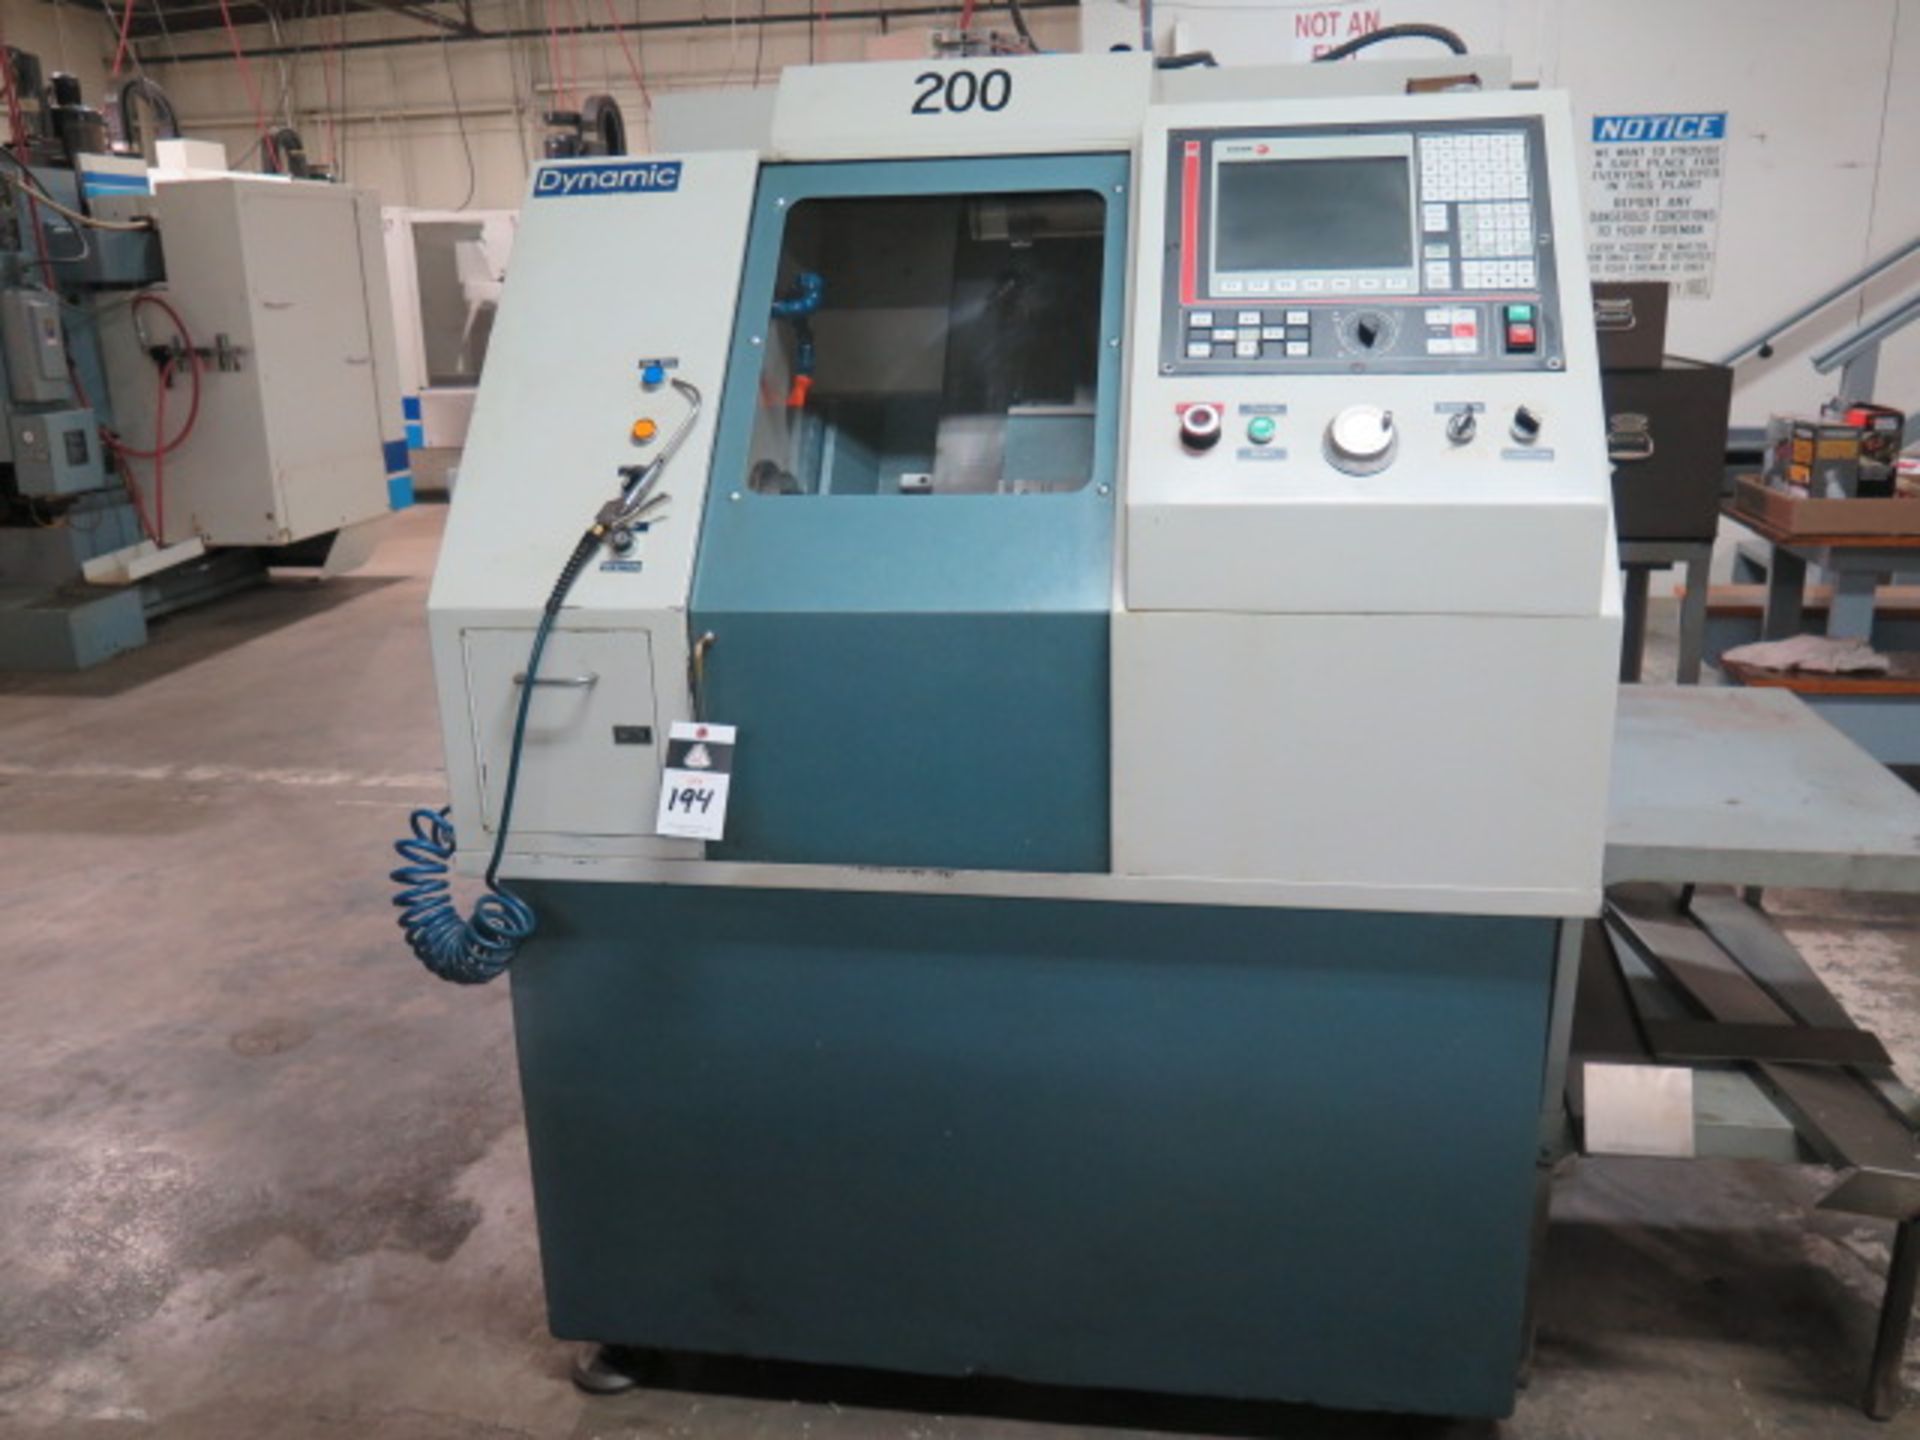 Dynamic GTS-55 CNC Cross Slide Lathe w/ Fagor CNC Controls, 5C Spindle, Coolant (SOLD AS-IS - NO